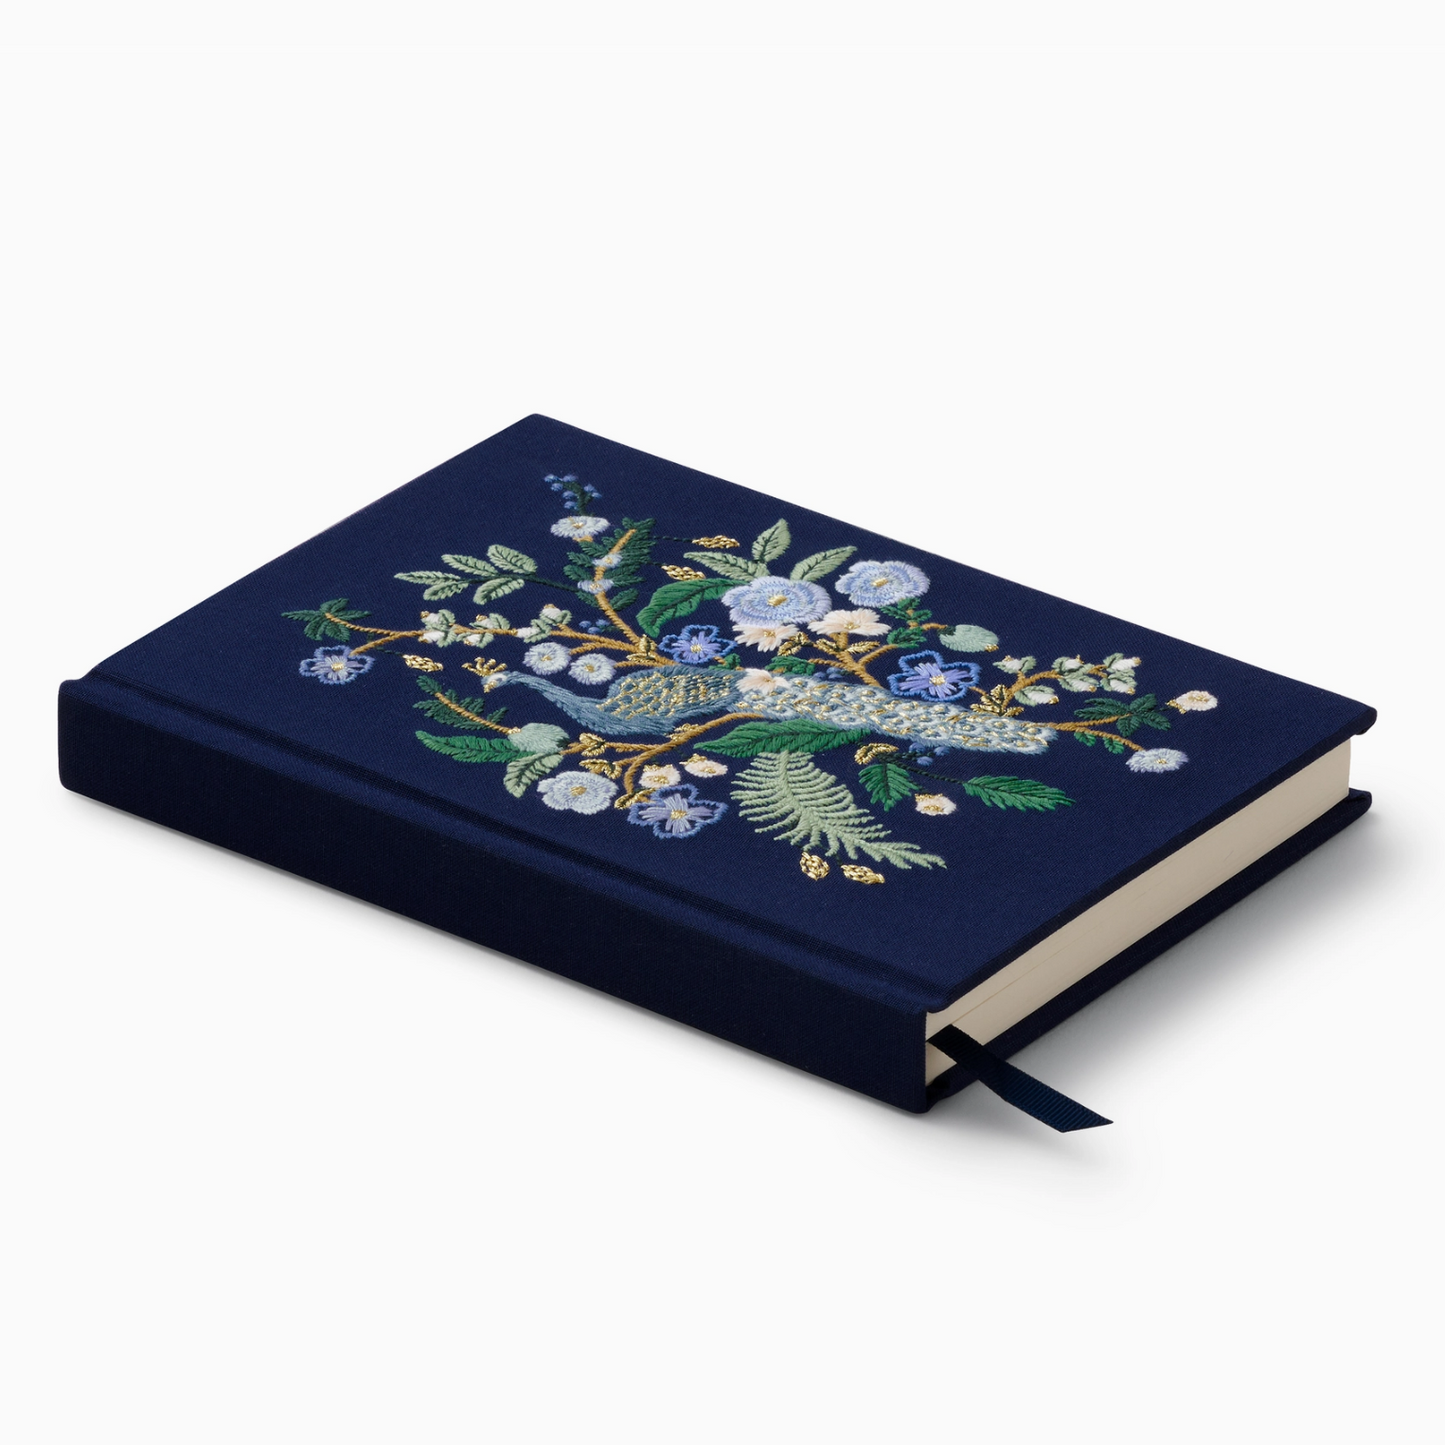 Peacock Embroidered Journal by Rifle Paper Co.